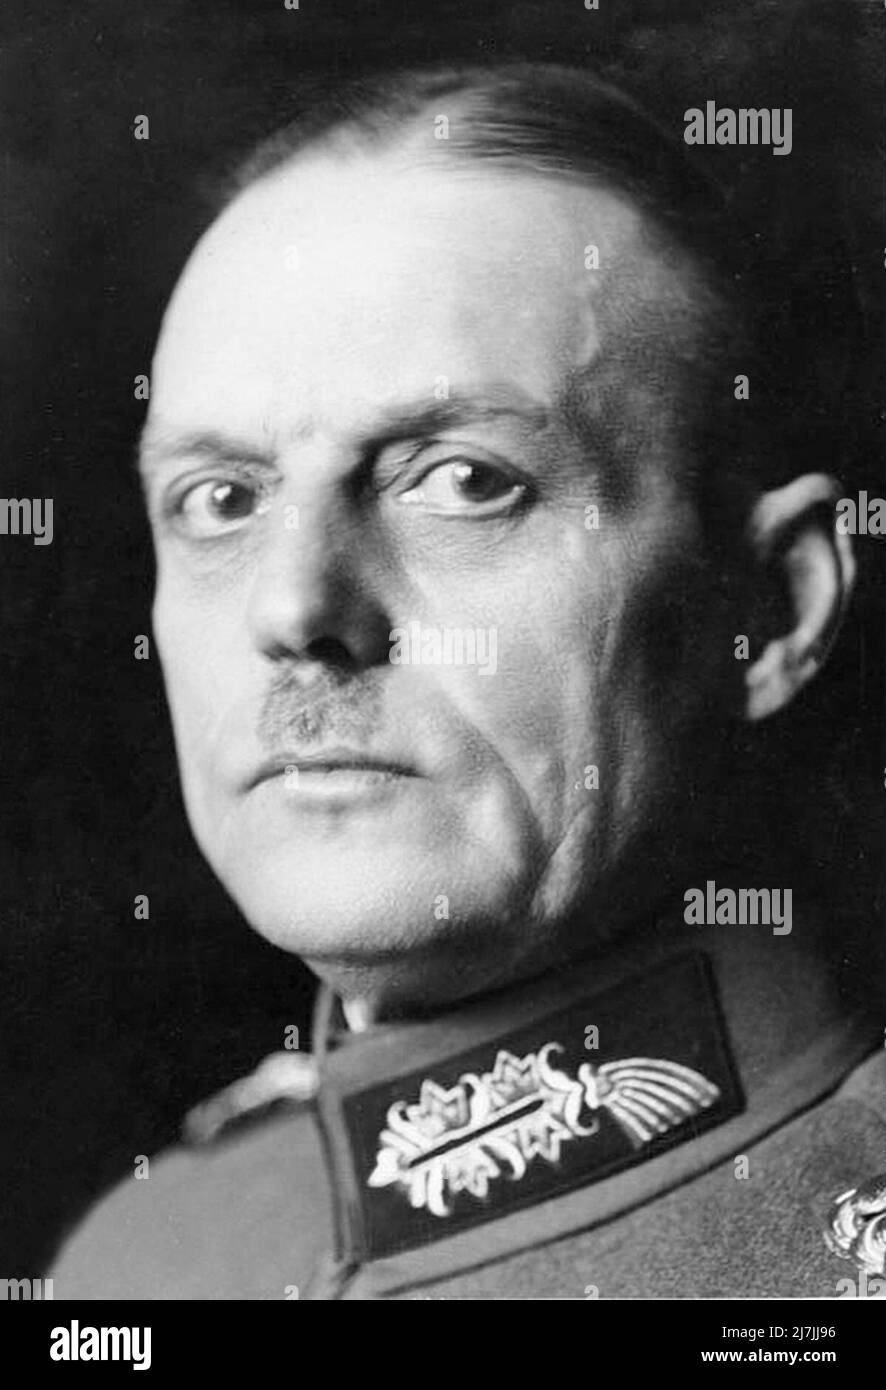 A portrait of the Wehrmacht Field Marshal Gerd von Runstedt. He was commander of Army Group A in France and was responsible for the ill advised decision to stop his advance once he had reached the channel coast. It was this break in the fighting that contributed to the success of the evacuation at Dunkirk. Later, during Operation Barbarossa, he was commander of the massive Army Group South. Stock Photo